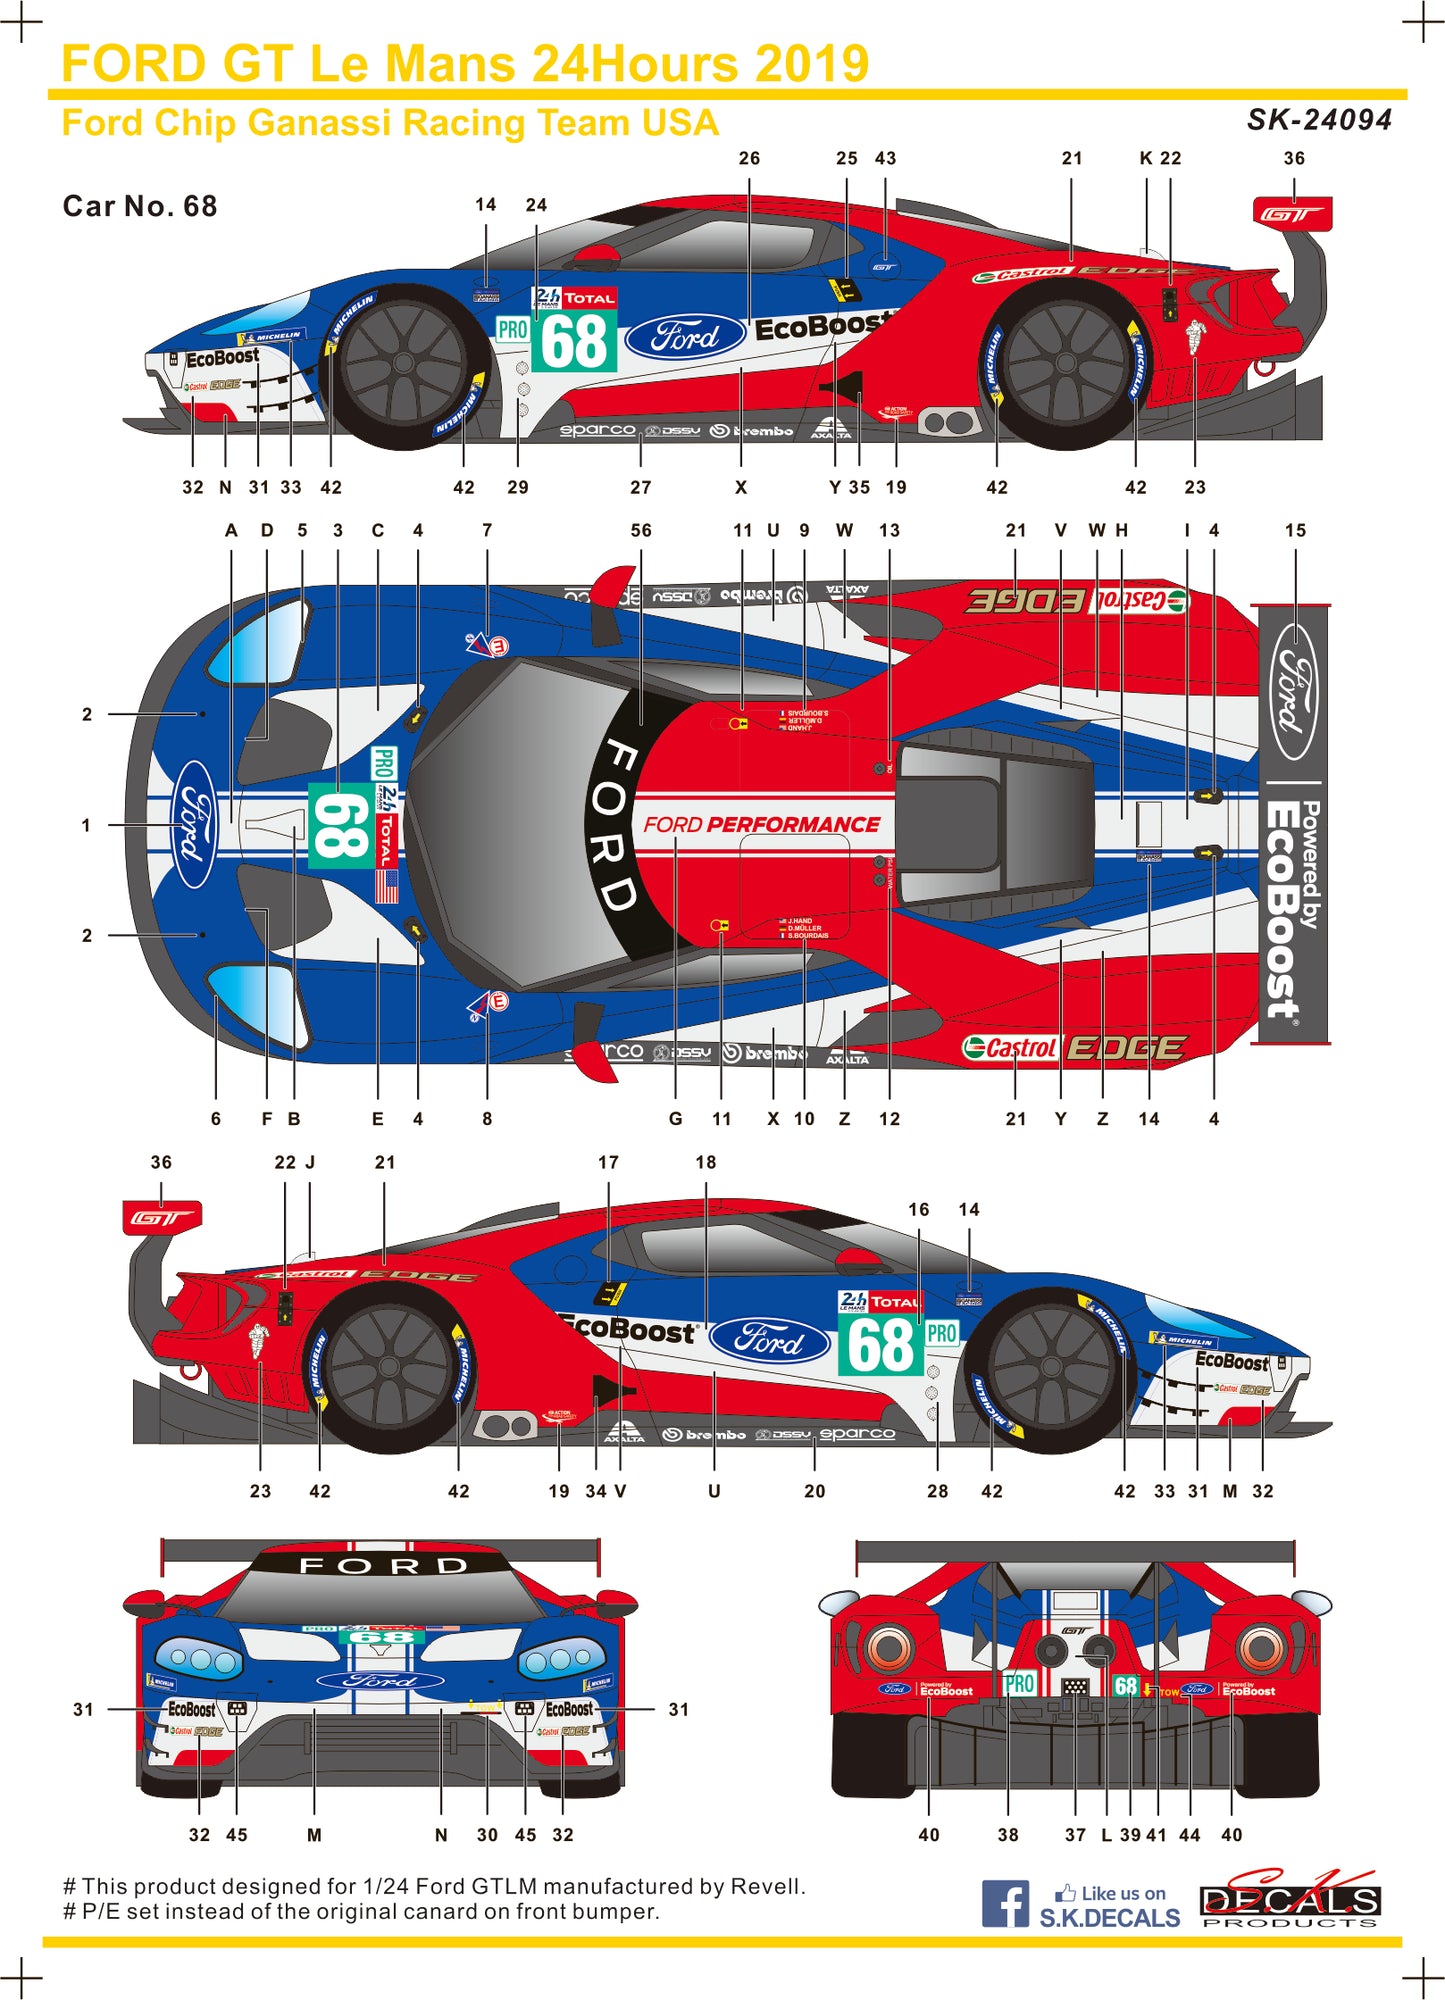 S.K. Decals 1:24 Ford GT Le Mans 2019 Ford Chip Ganassi Racing Team USA Decal Set